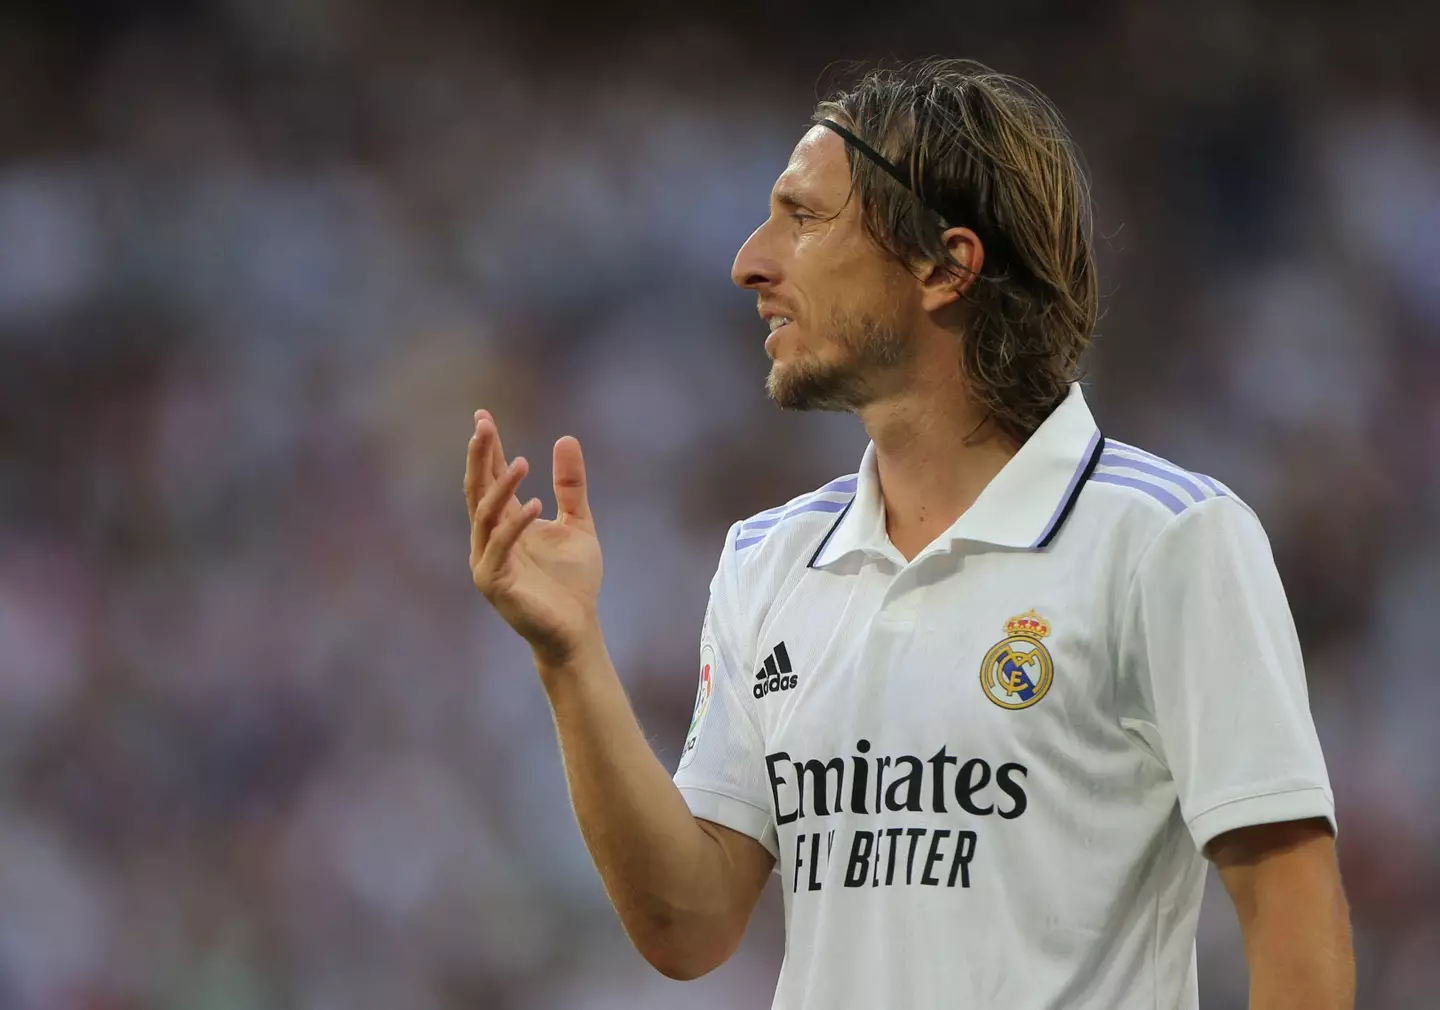 Modric has won a whopping 21 trophies with Real since joining from Tottenham Hotspur in 2012. (Image